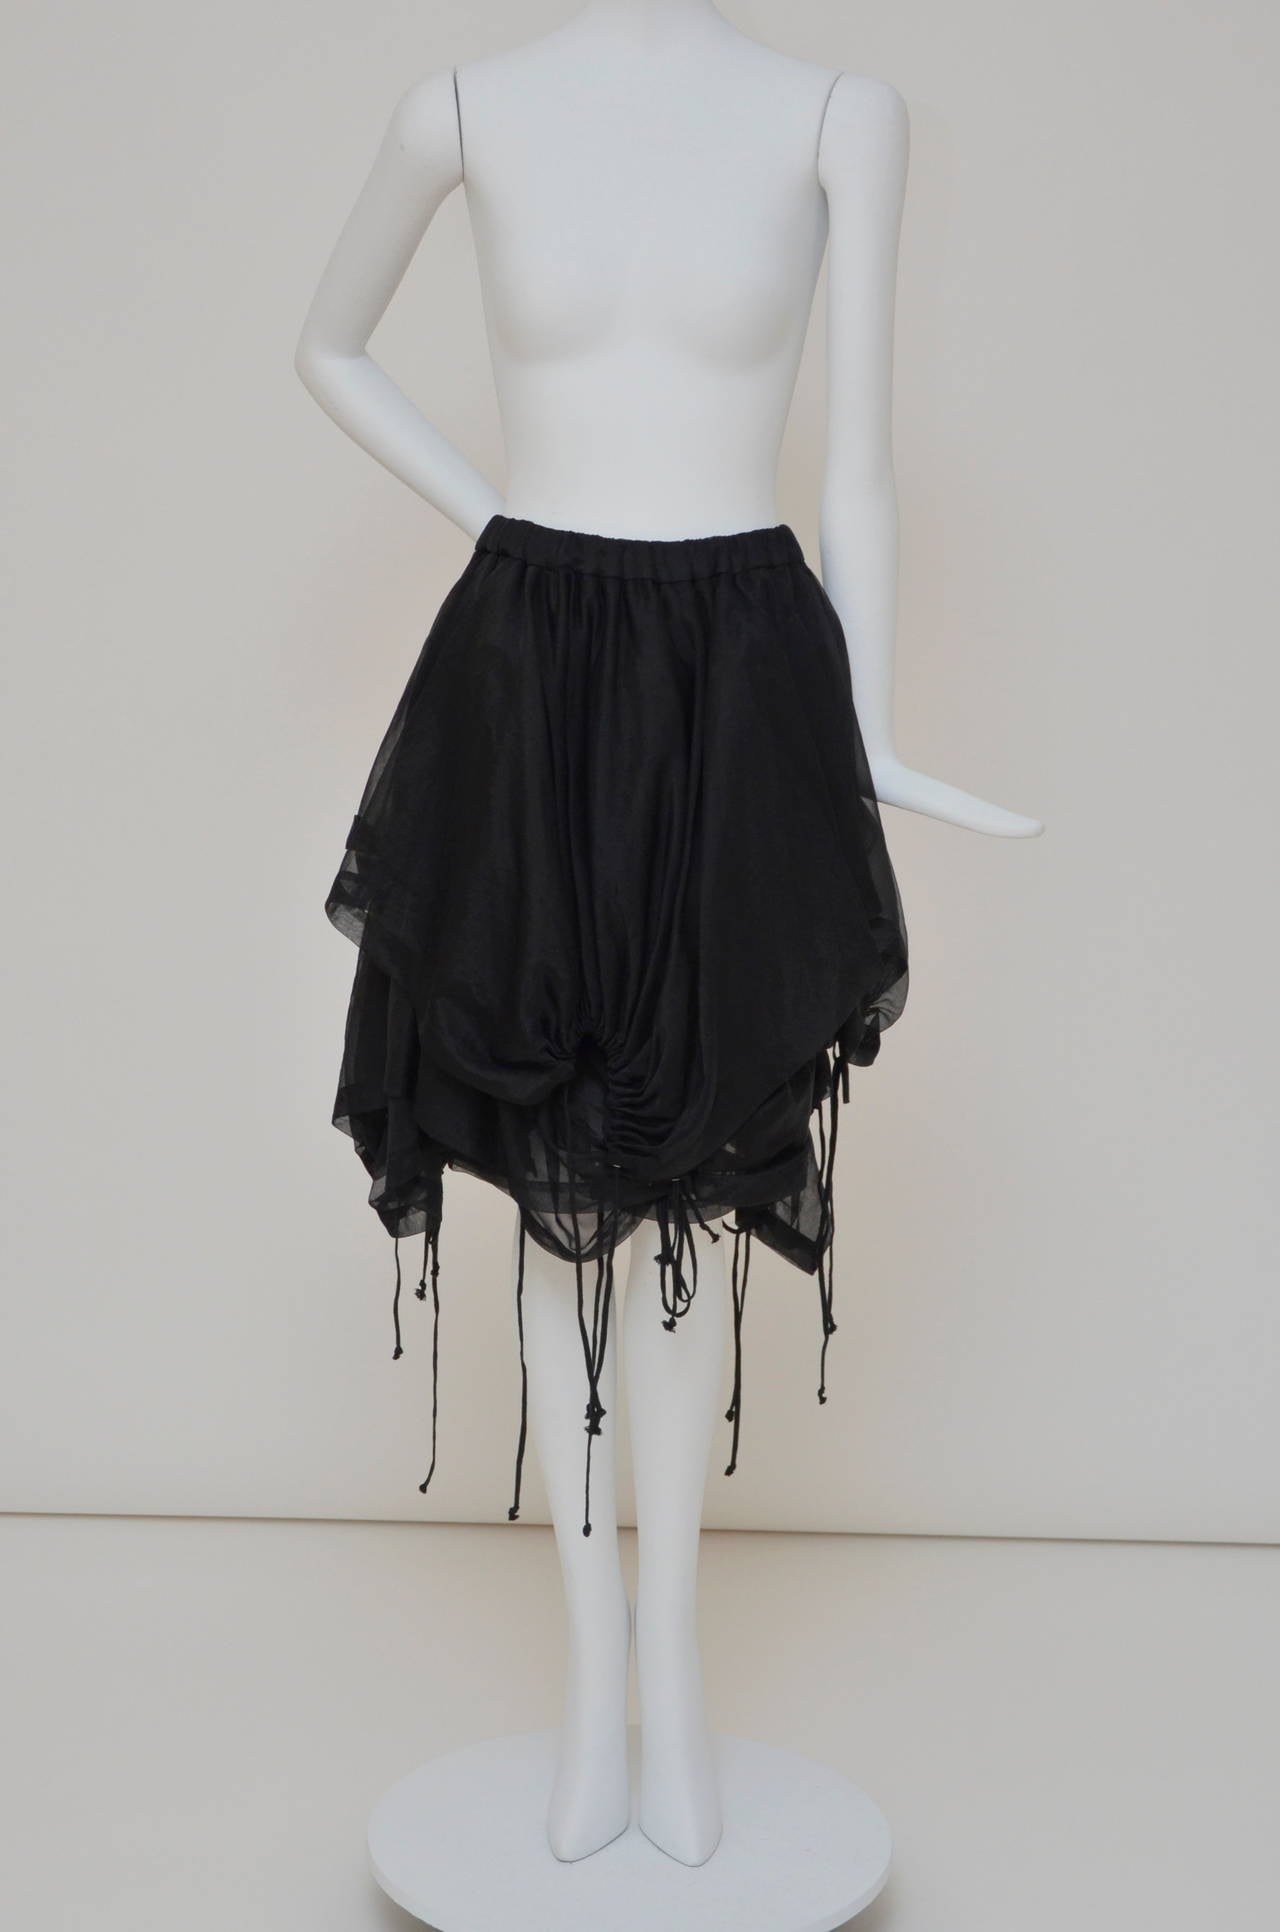 Comme des garçons layered  vintage skirt with strings.
Very unusual and unique cut,look and style.
Excellent condition with few hard to notice very little tiny  snags.
From AD 1990 .
Made in japan.Size S.
Fabric 100% nylon.

FINAL SALE.